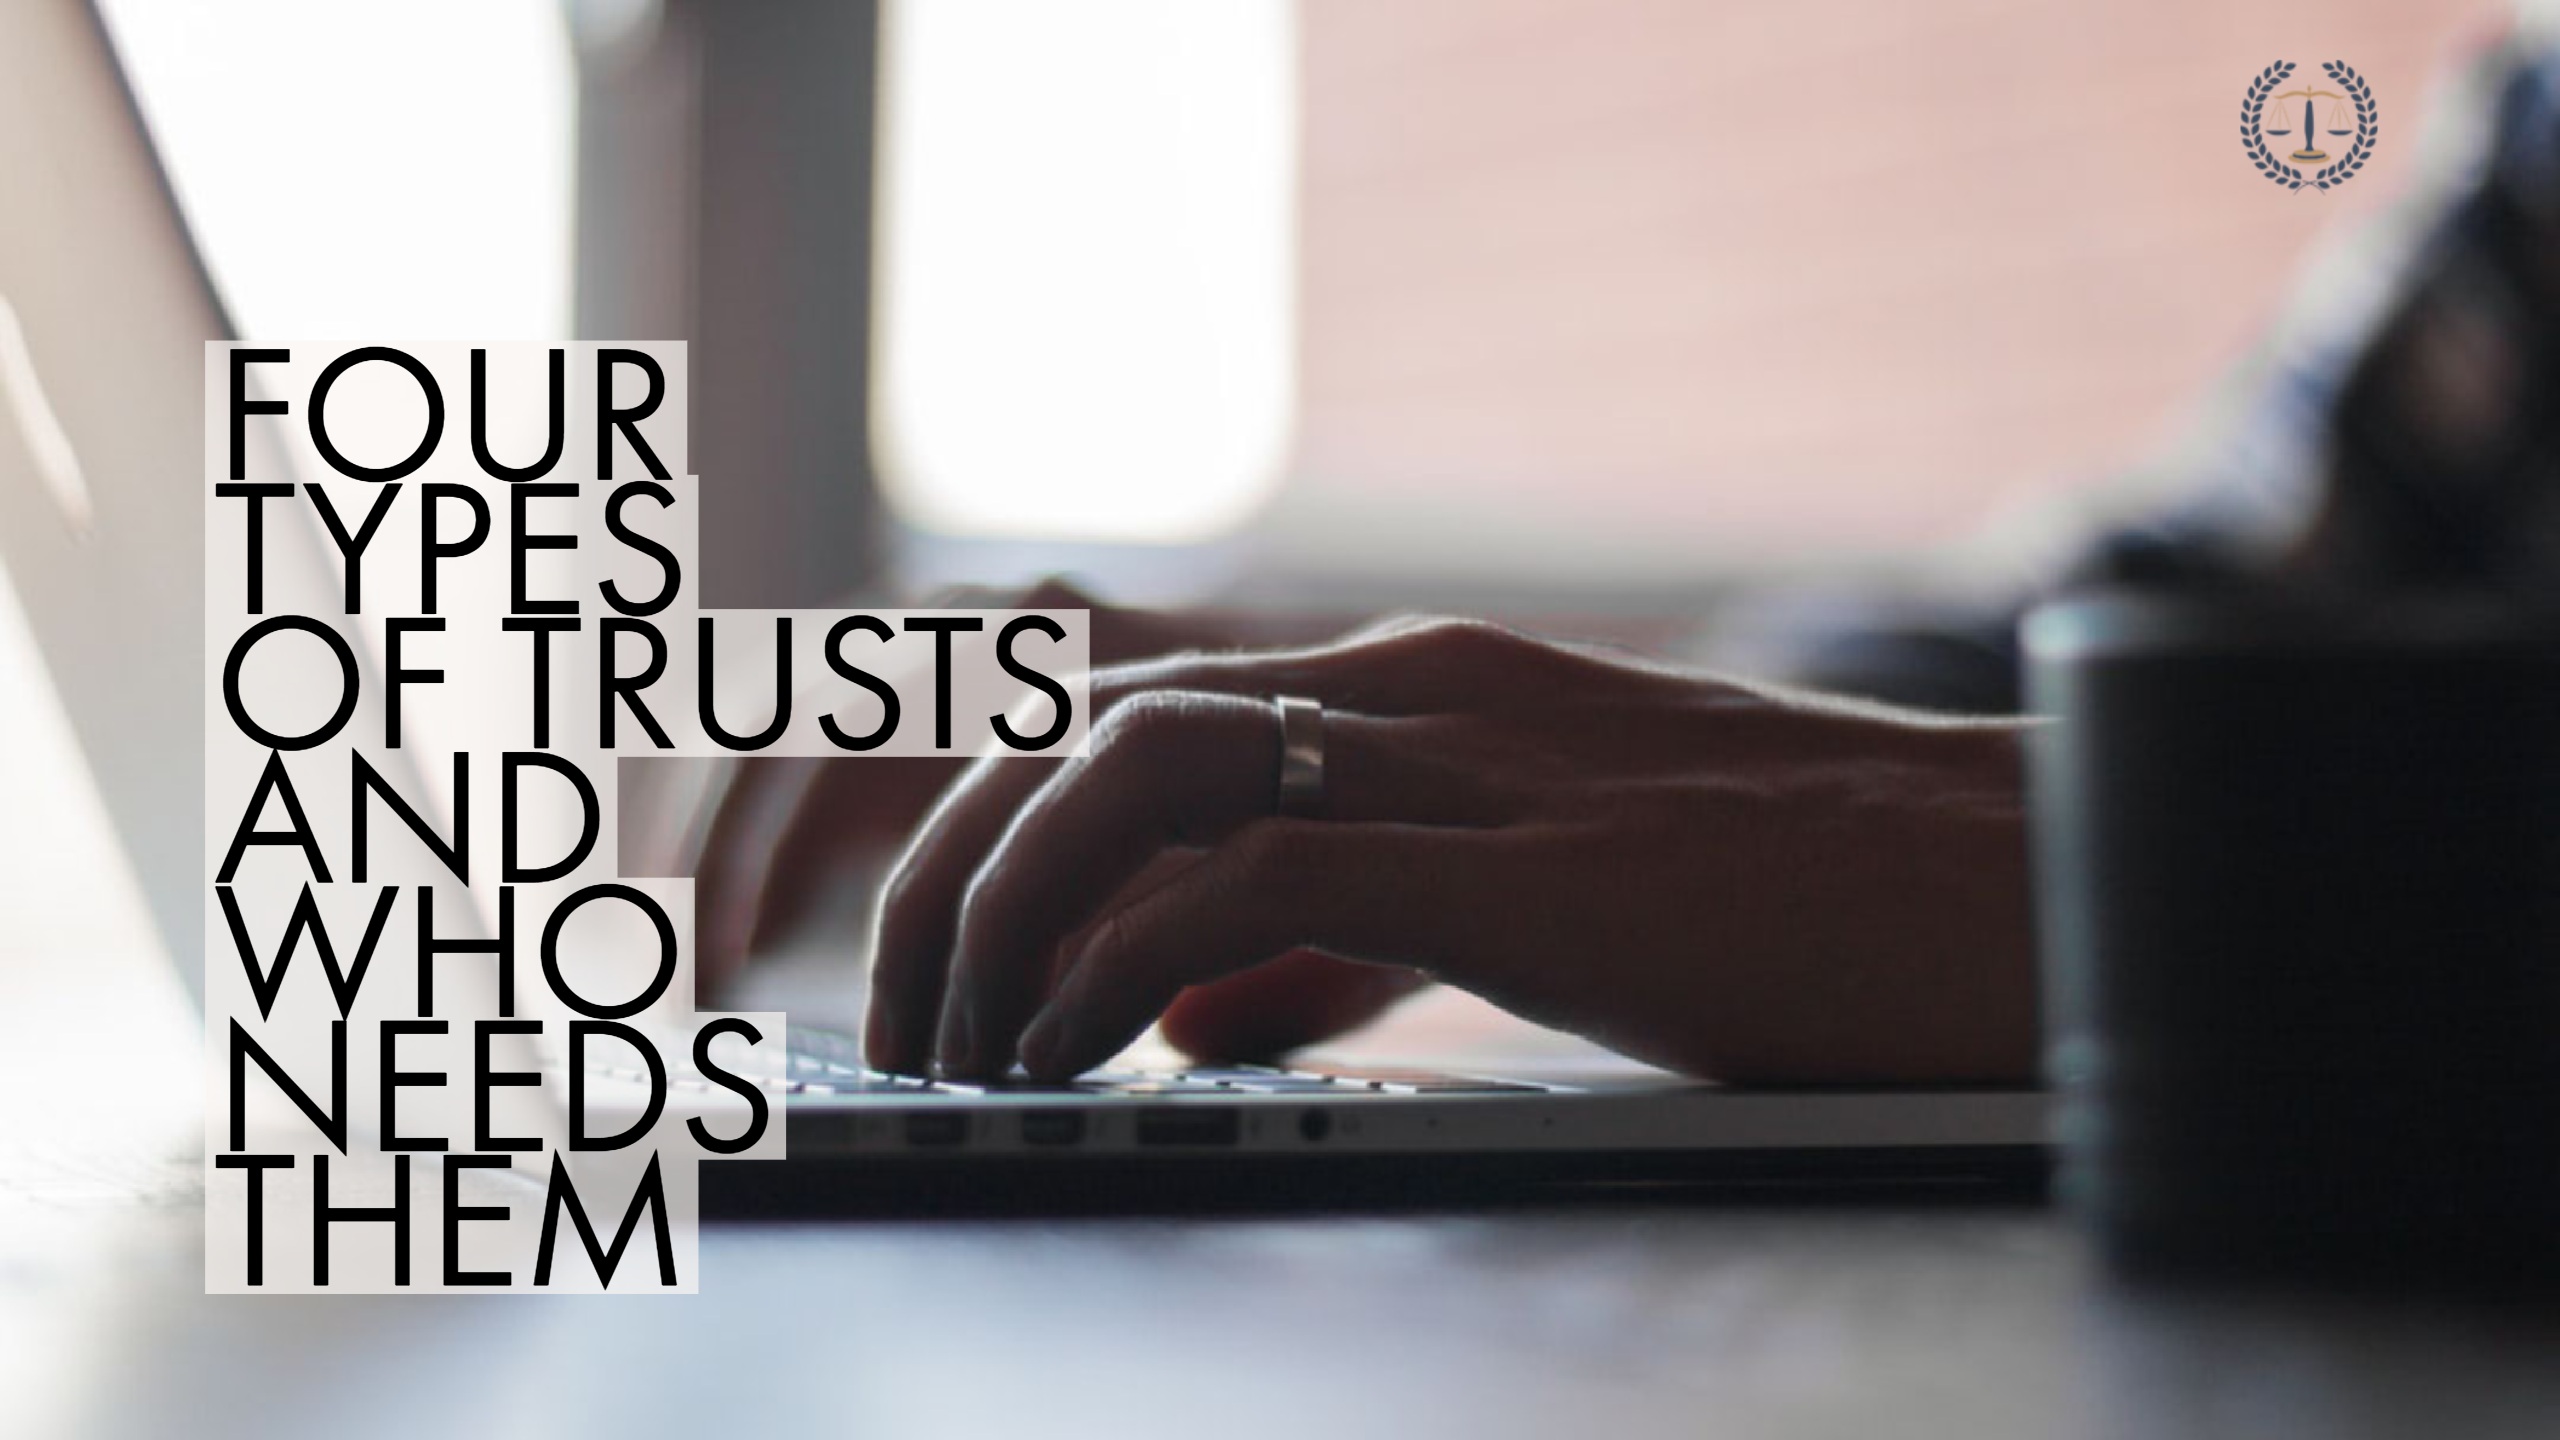 Four types of trusts and who needs them